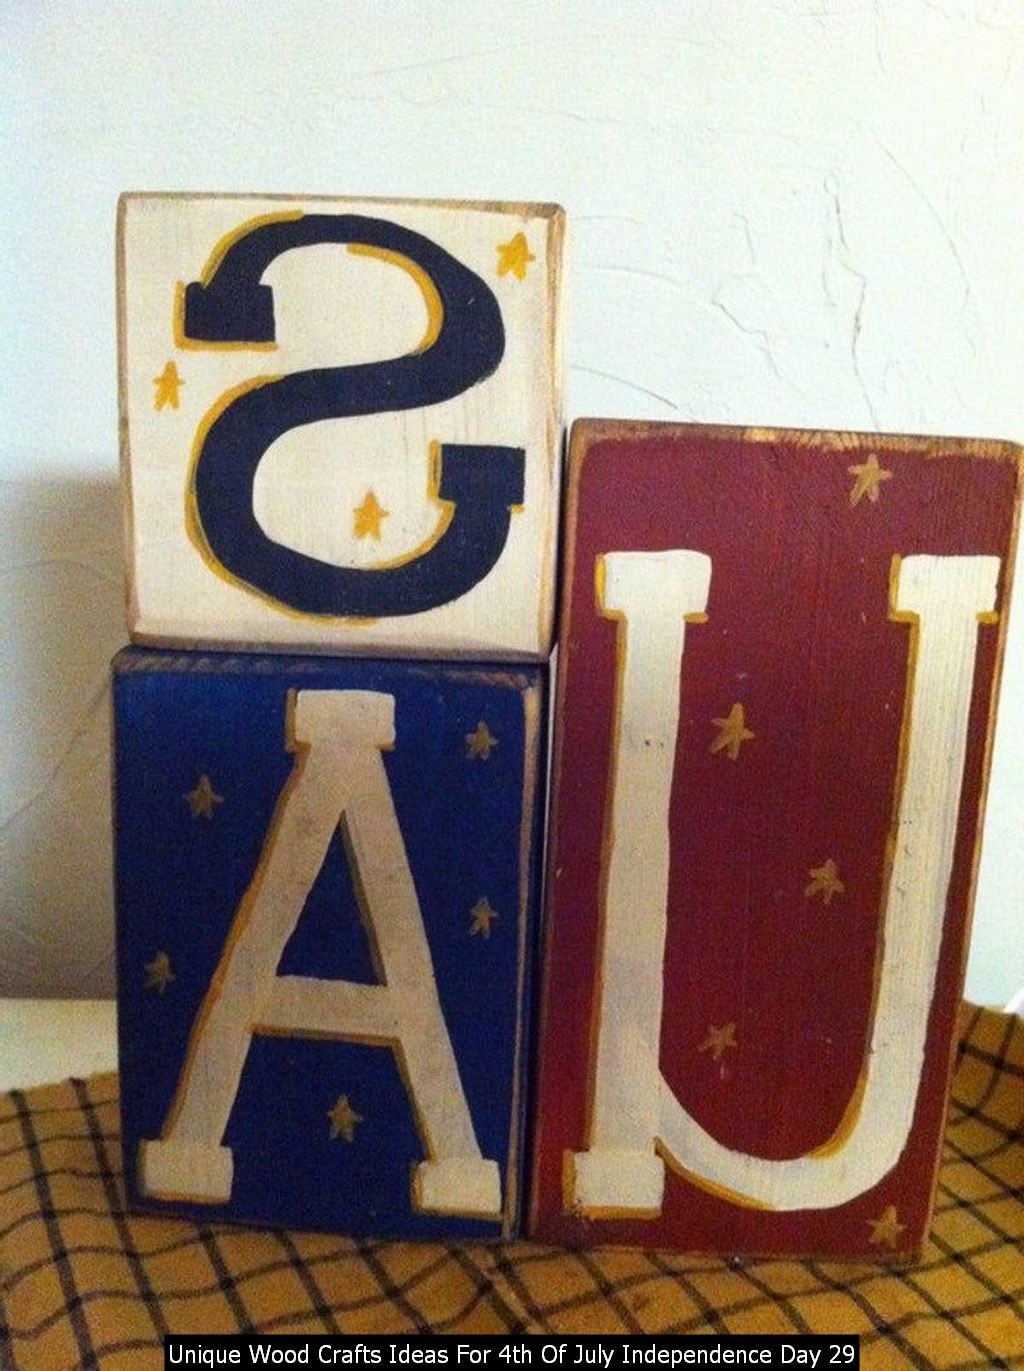 Unique Wood Crafts Ideas For 4th Of July Independence Day 29